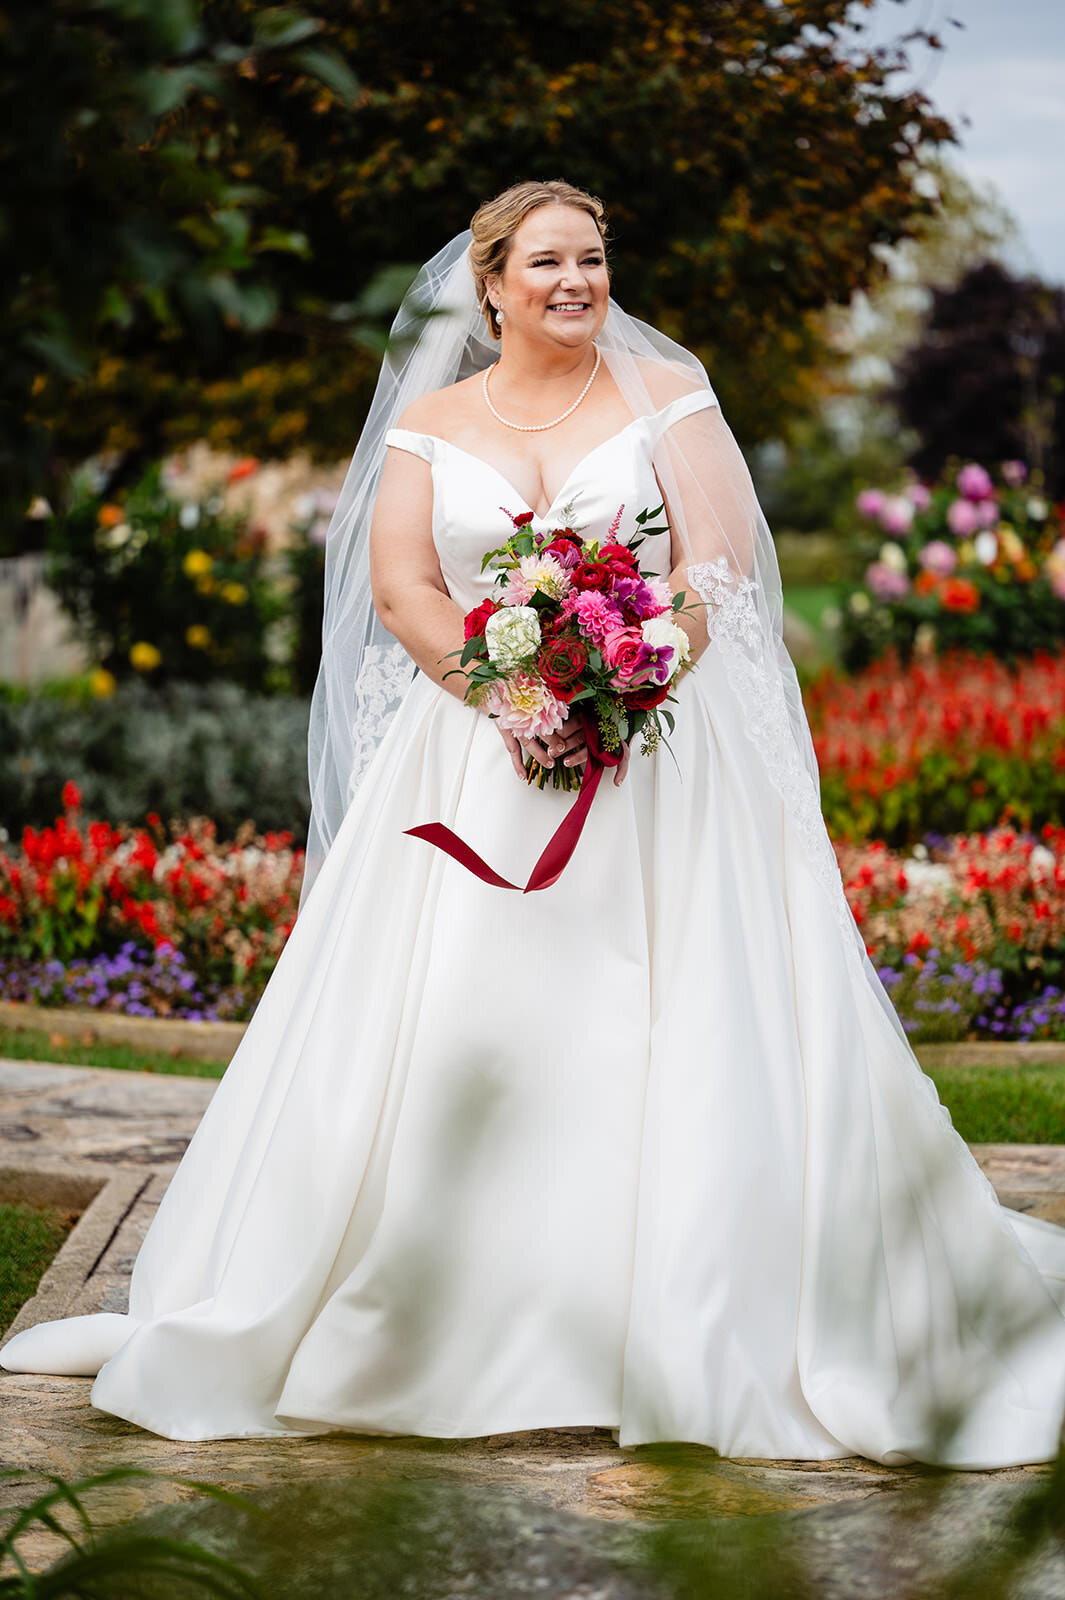 A bride in a white gown with a long train and veil holding a bouquet, smiling widely in a garden setting